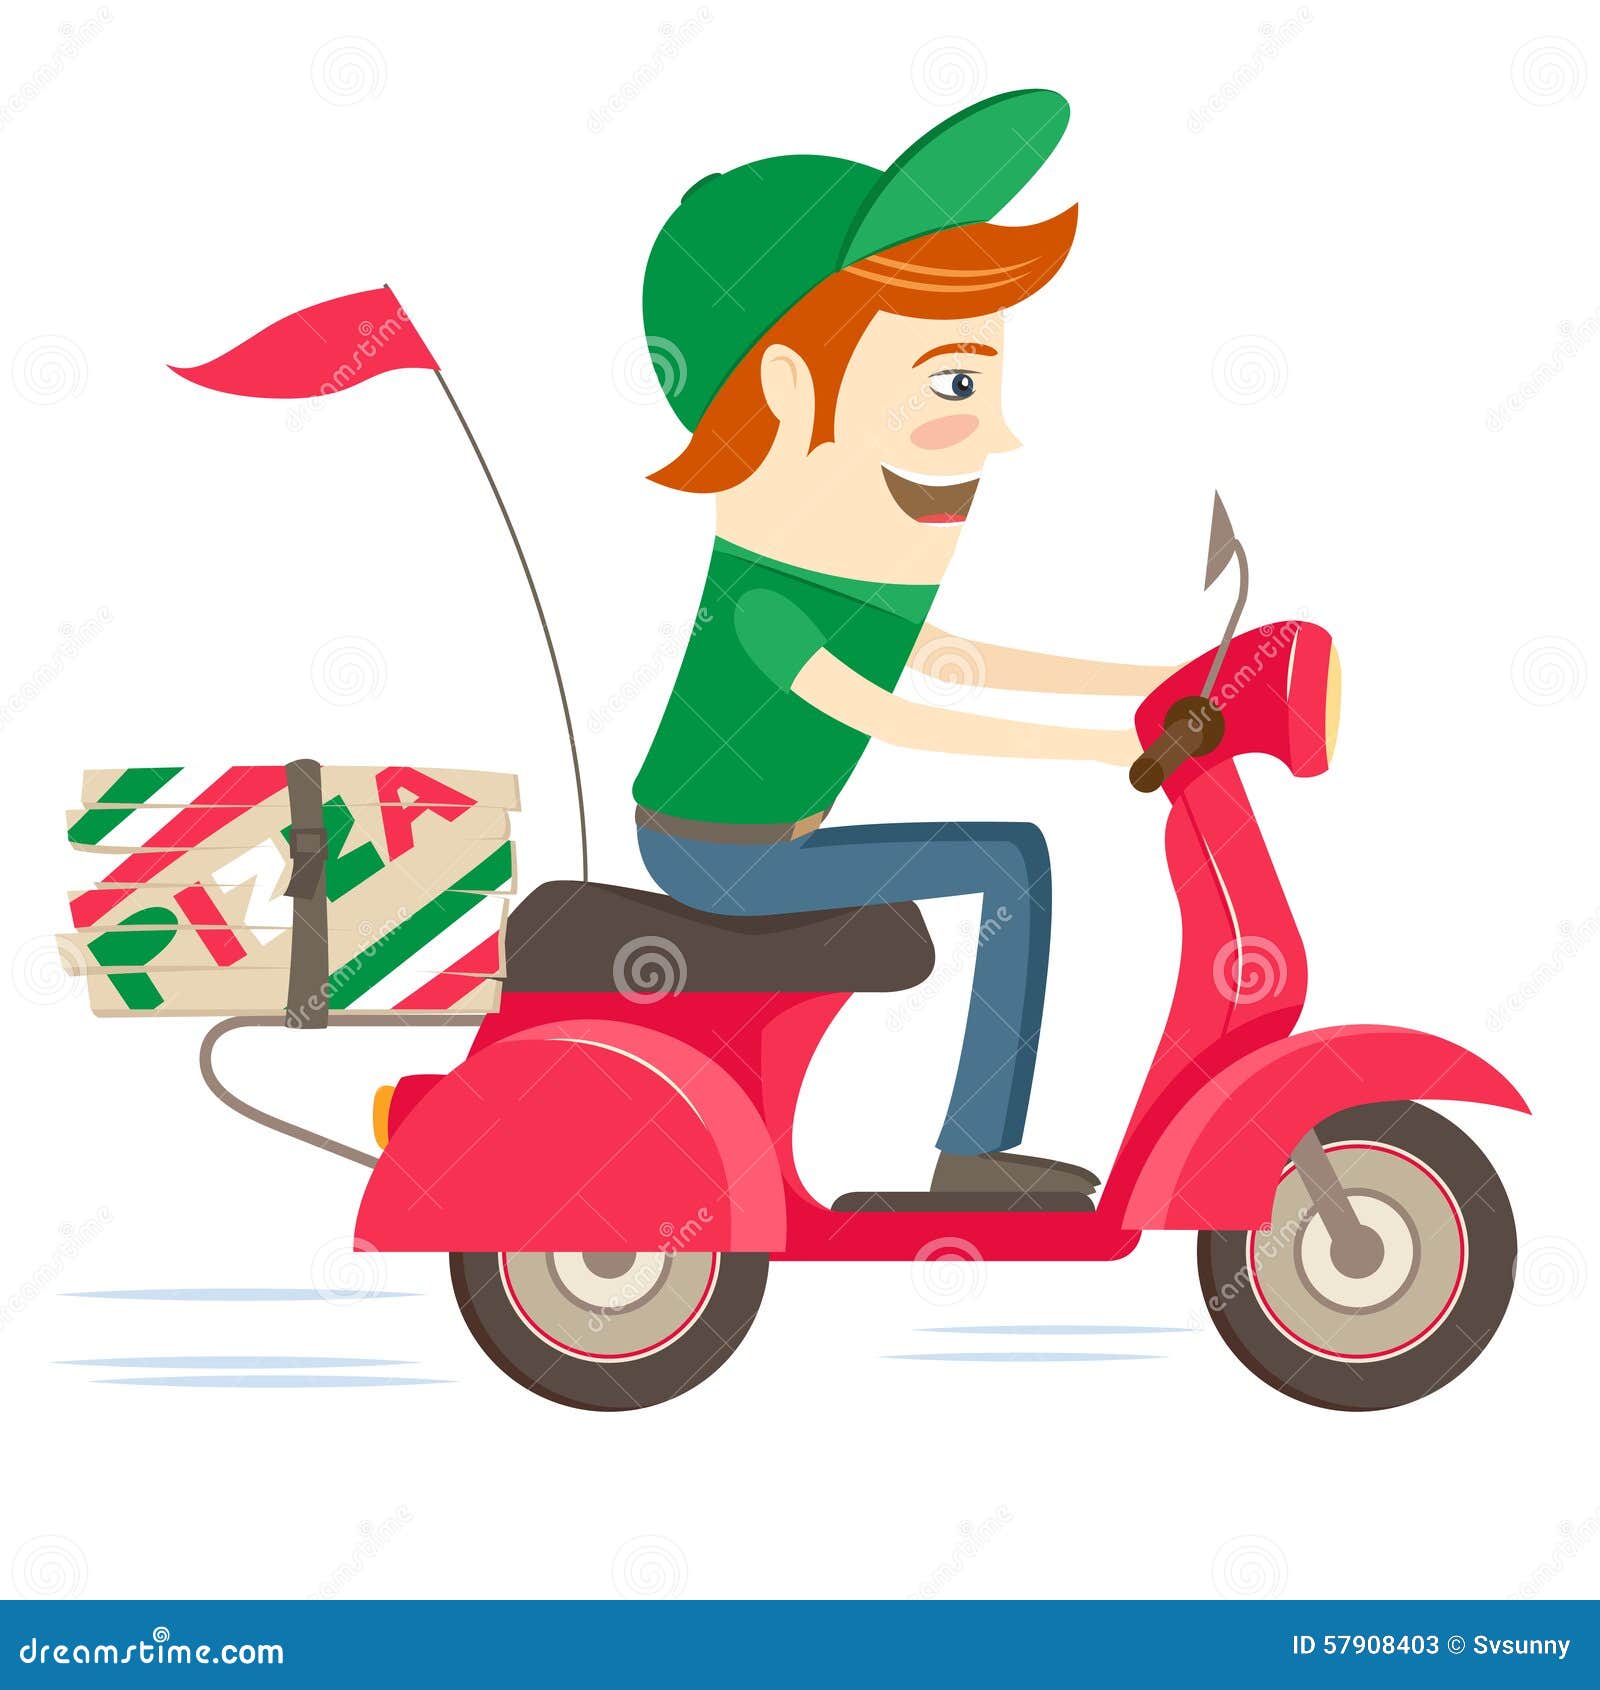 clipart delivery boy - photo #24